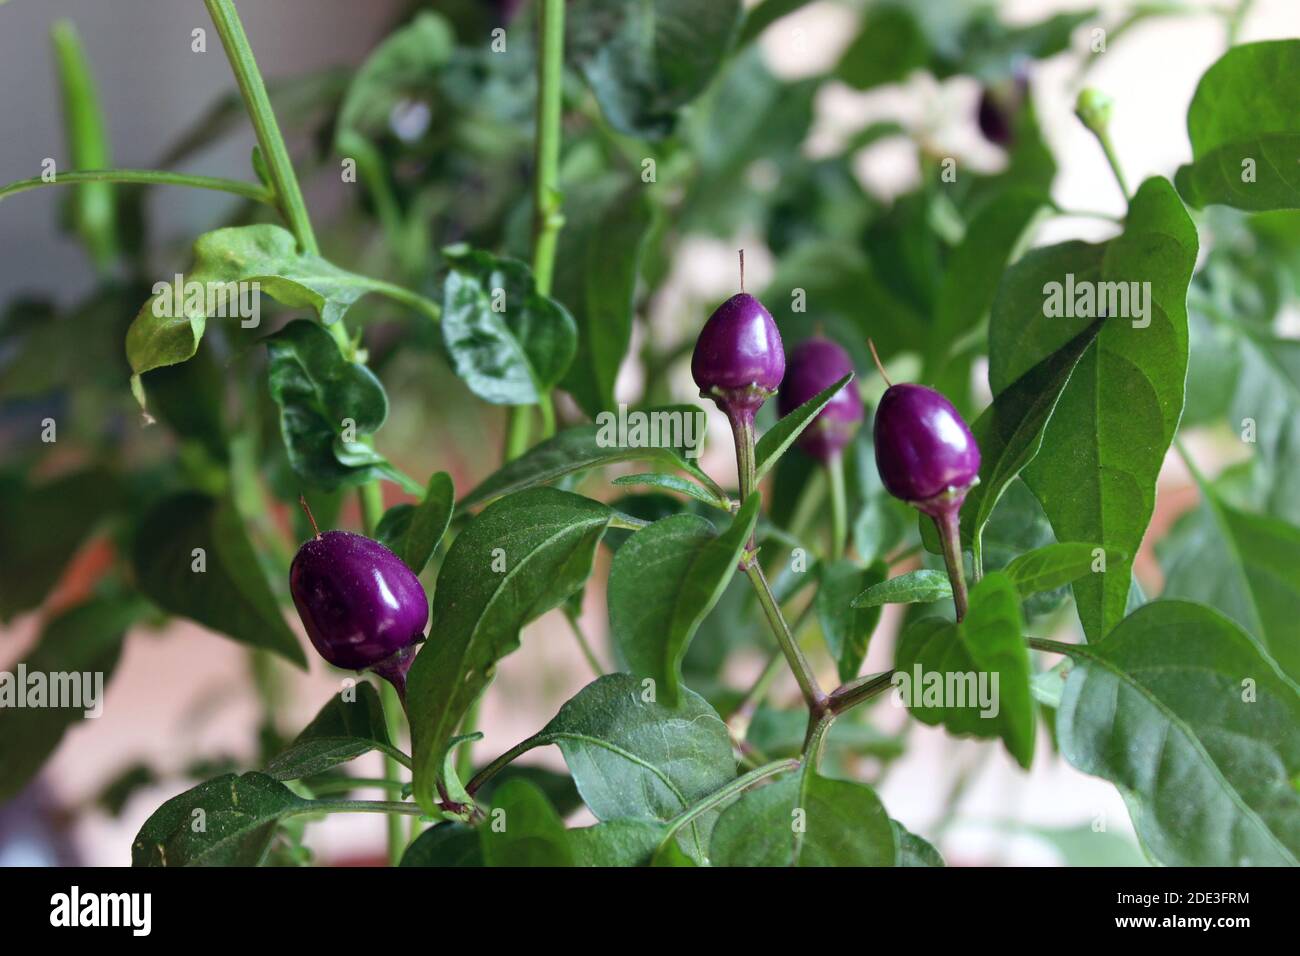 Small purple hot chili peppers close-up. Capsicum frutescens. Growing plant detail. Garden bed, greenhouse. Conical chillies, green leaves. Spicy bio Stock Photo